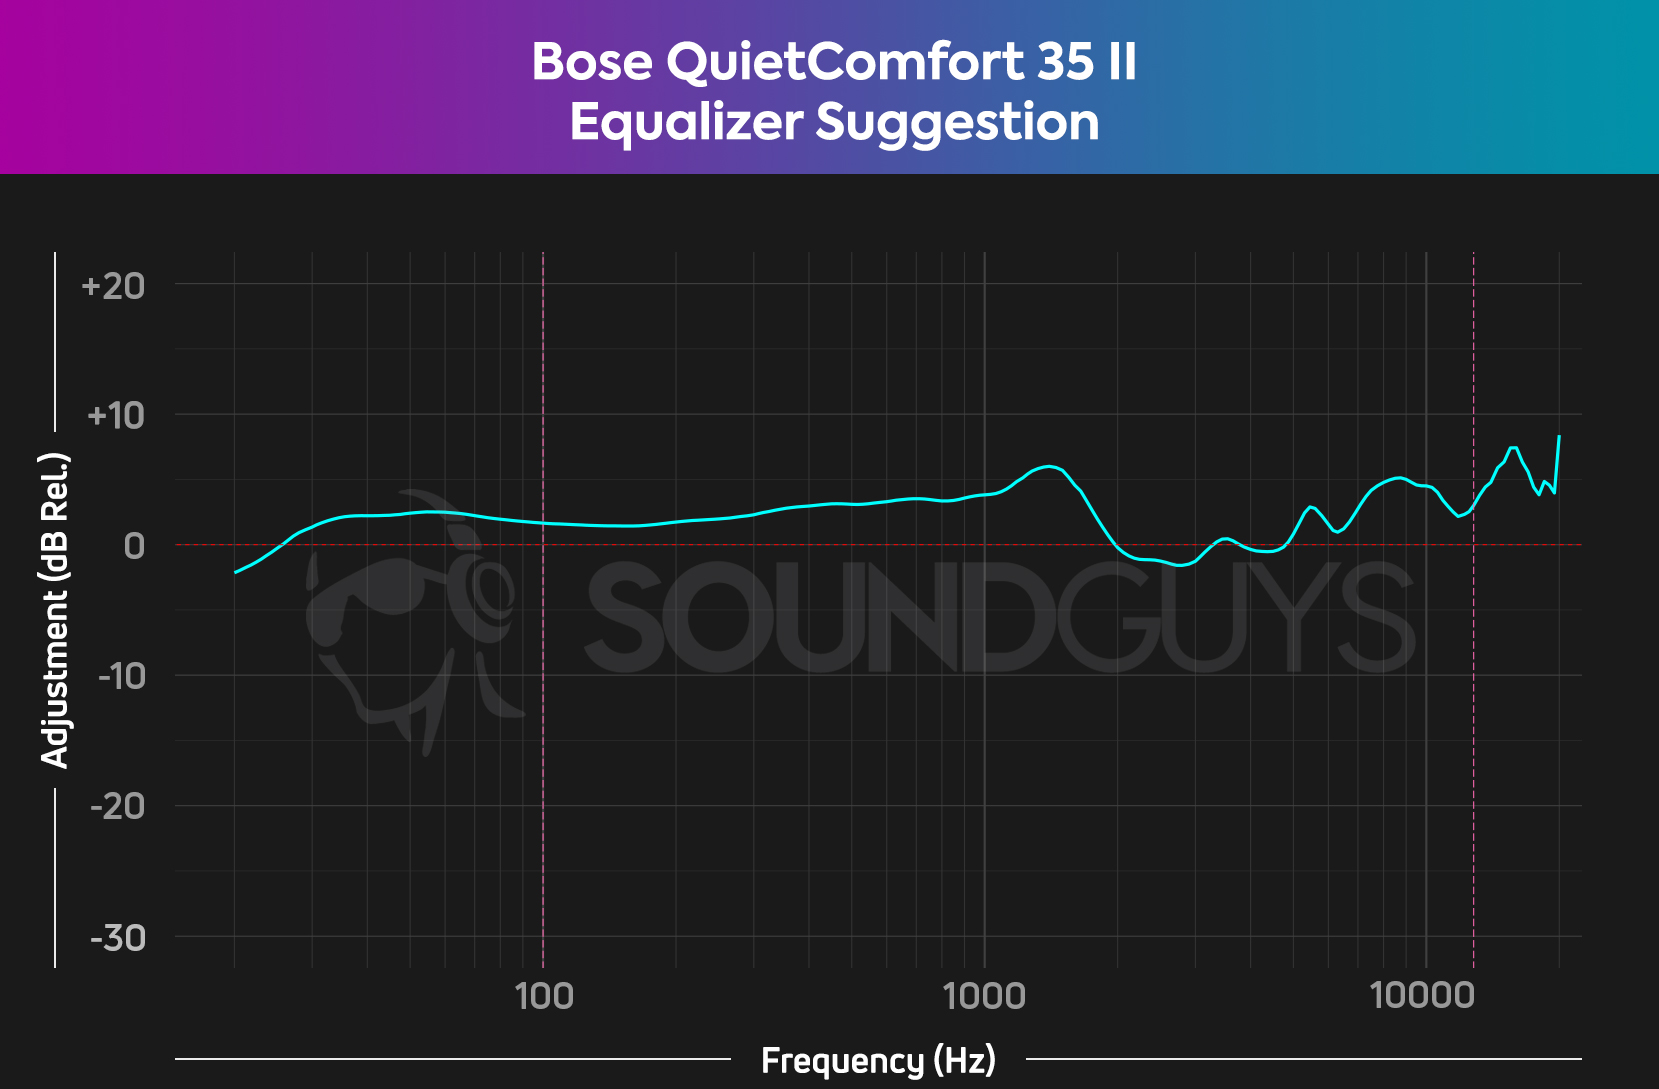 Chart shows mobile EQ suggestion for the Bose QuietComfort 35 II.